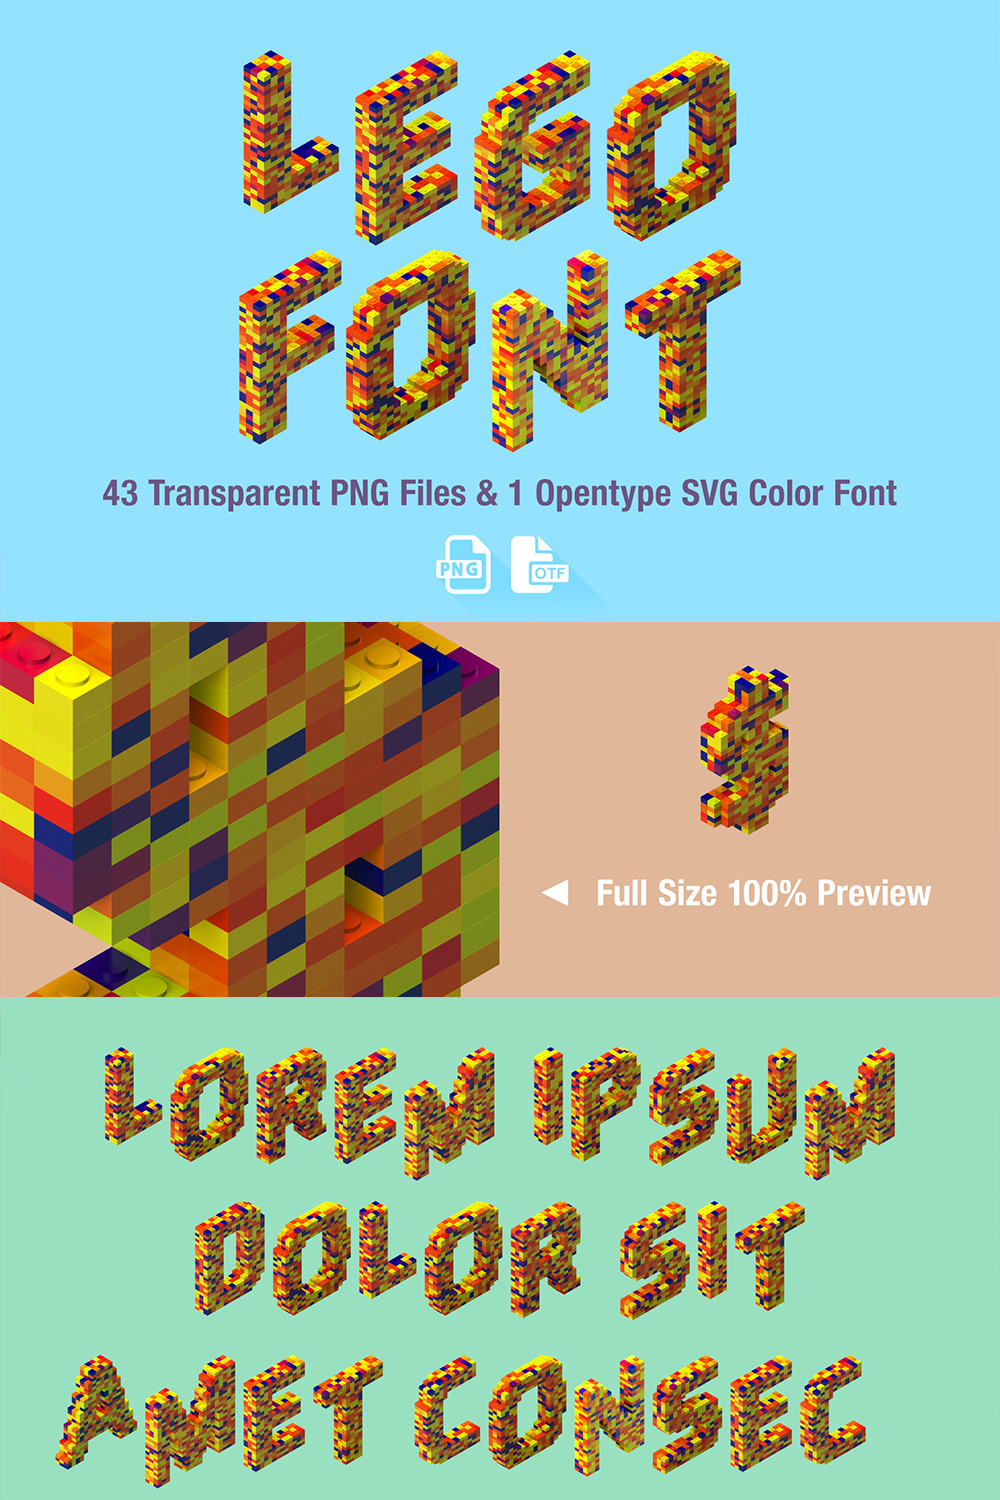 Ms Lego Opentype Color Font and PNG pinterest image.